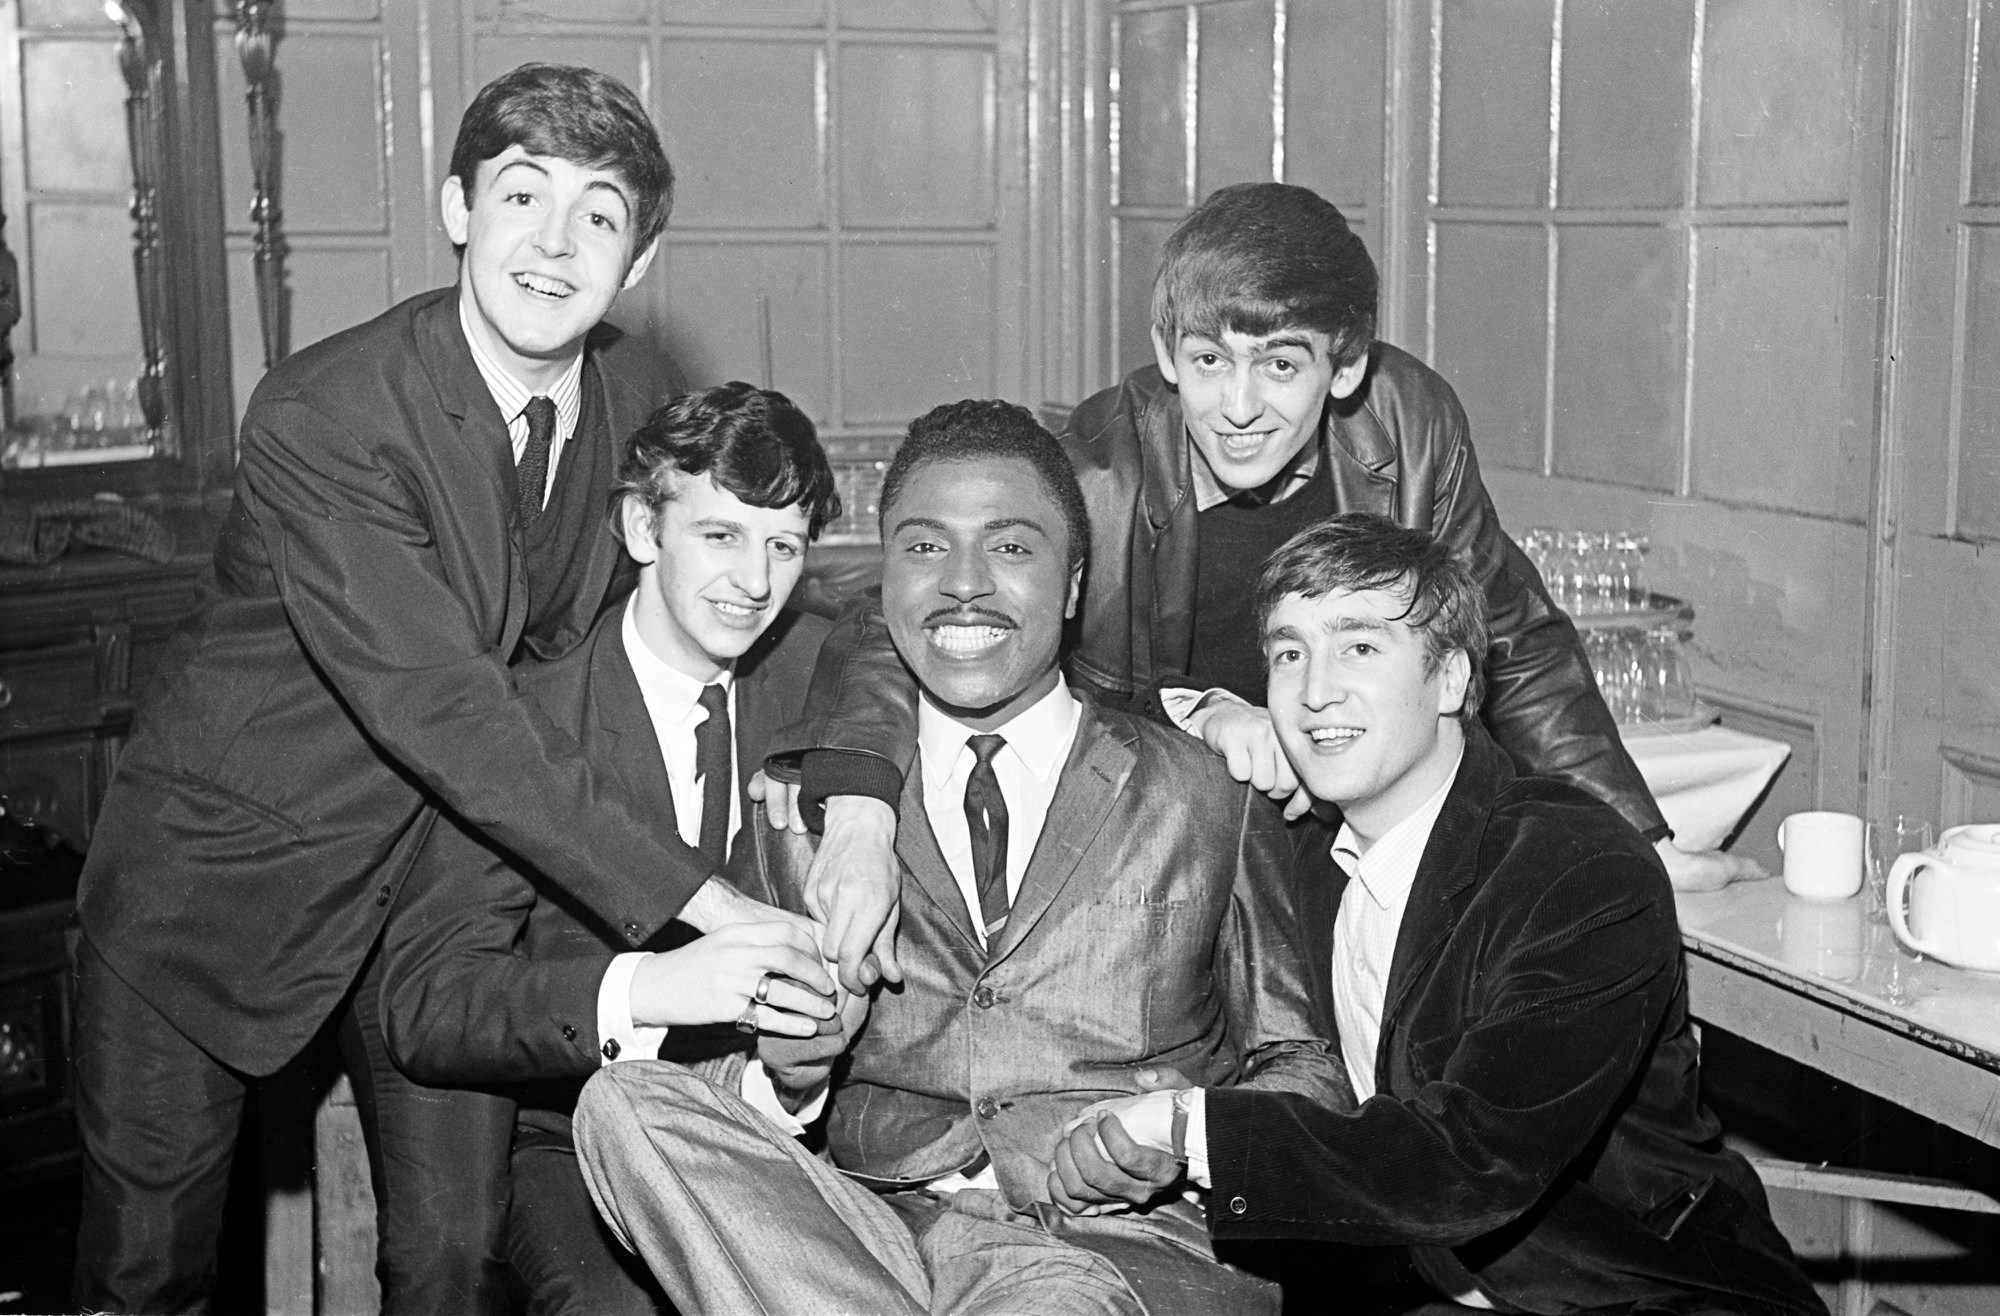 Paul McCartney and Ringo Starr pay tribute to Little Richard.